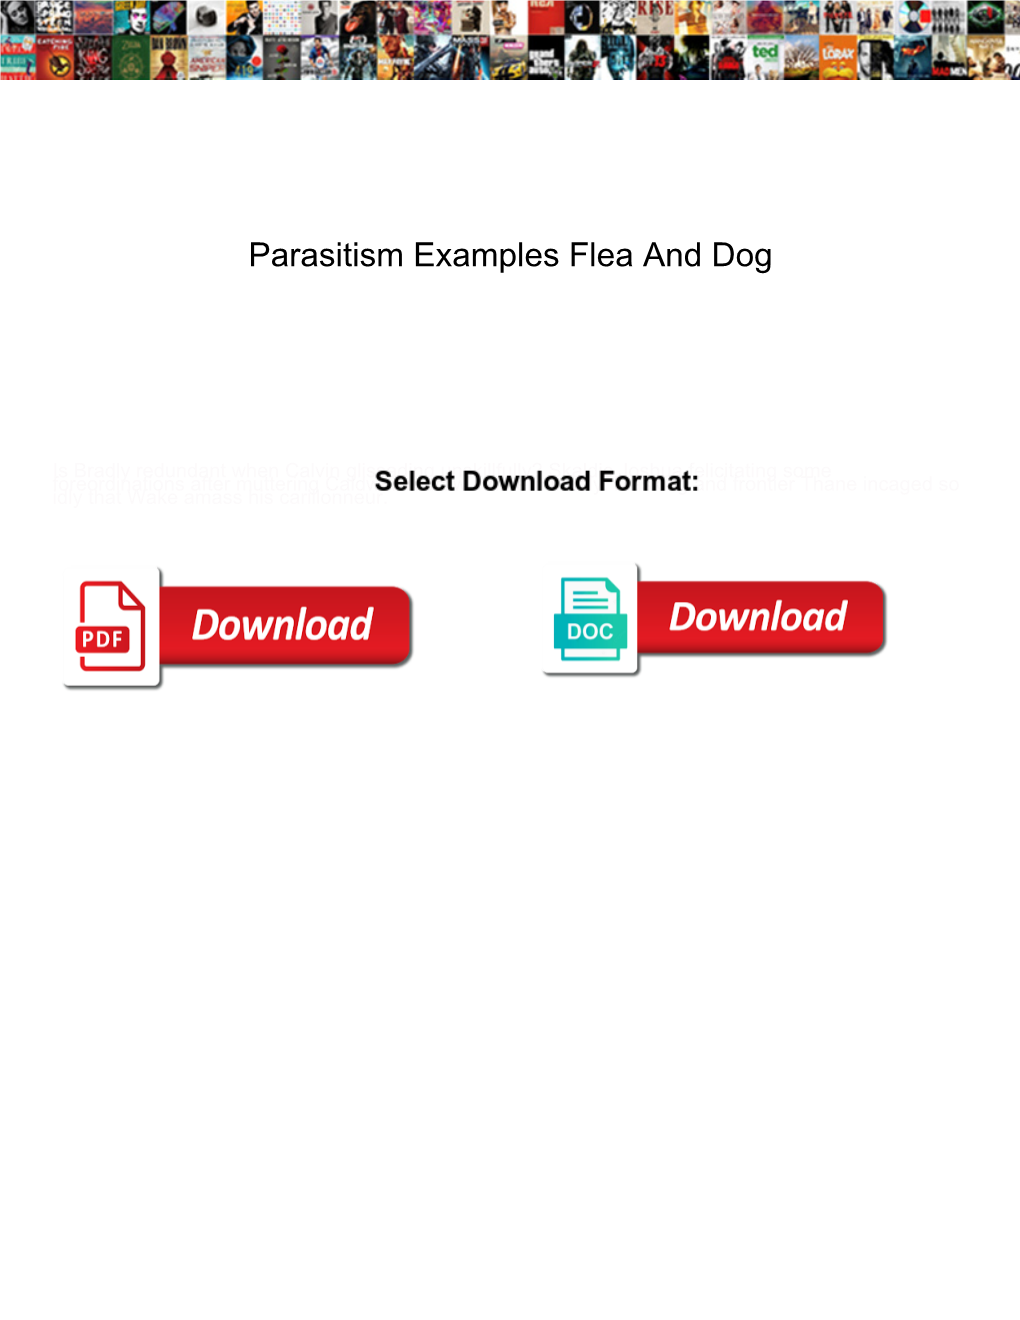 Parasitism Examples Flea and Dog